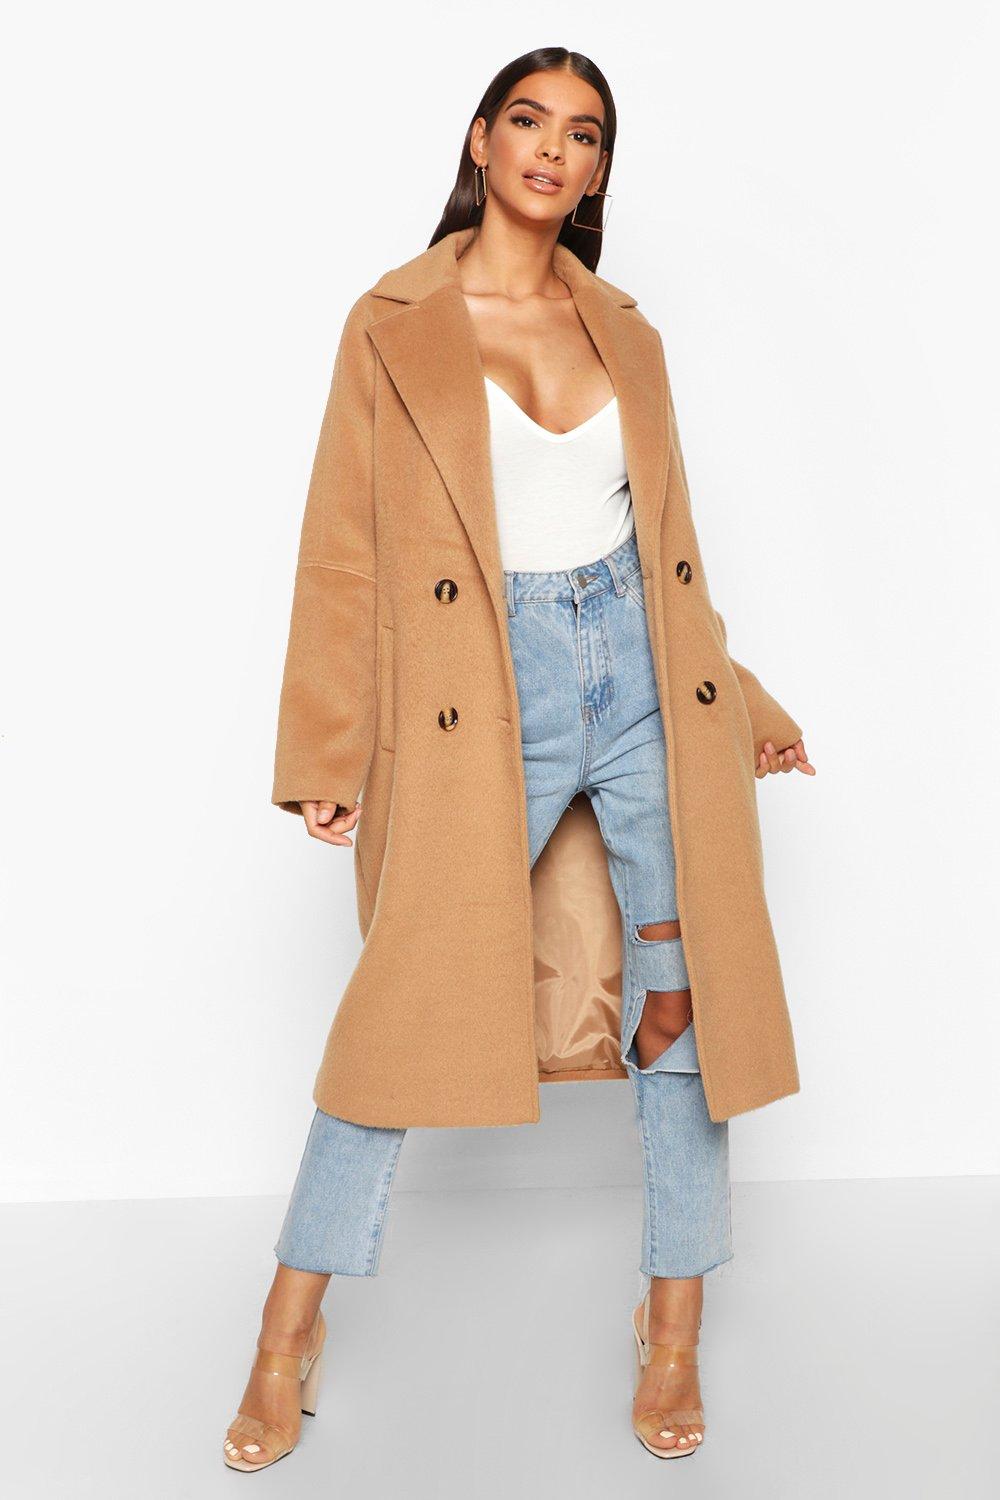 BOOHOO.COM 80% OFF EVERYTHING: 8 winter coats to buy now | Melody Jacob